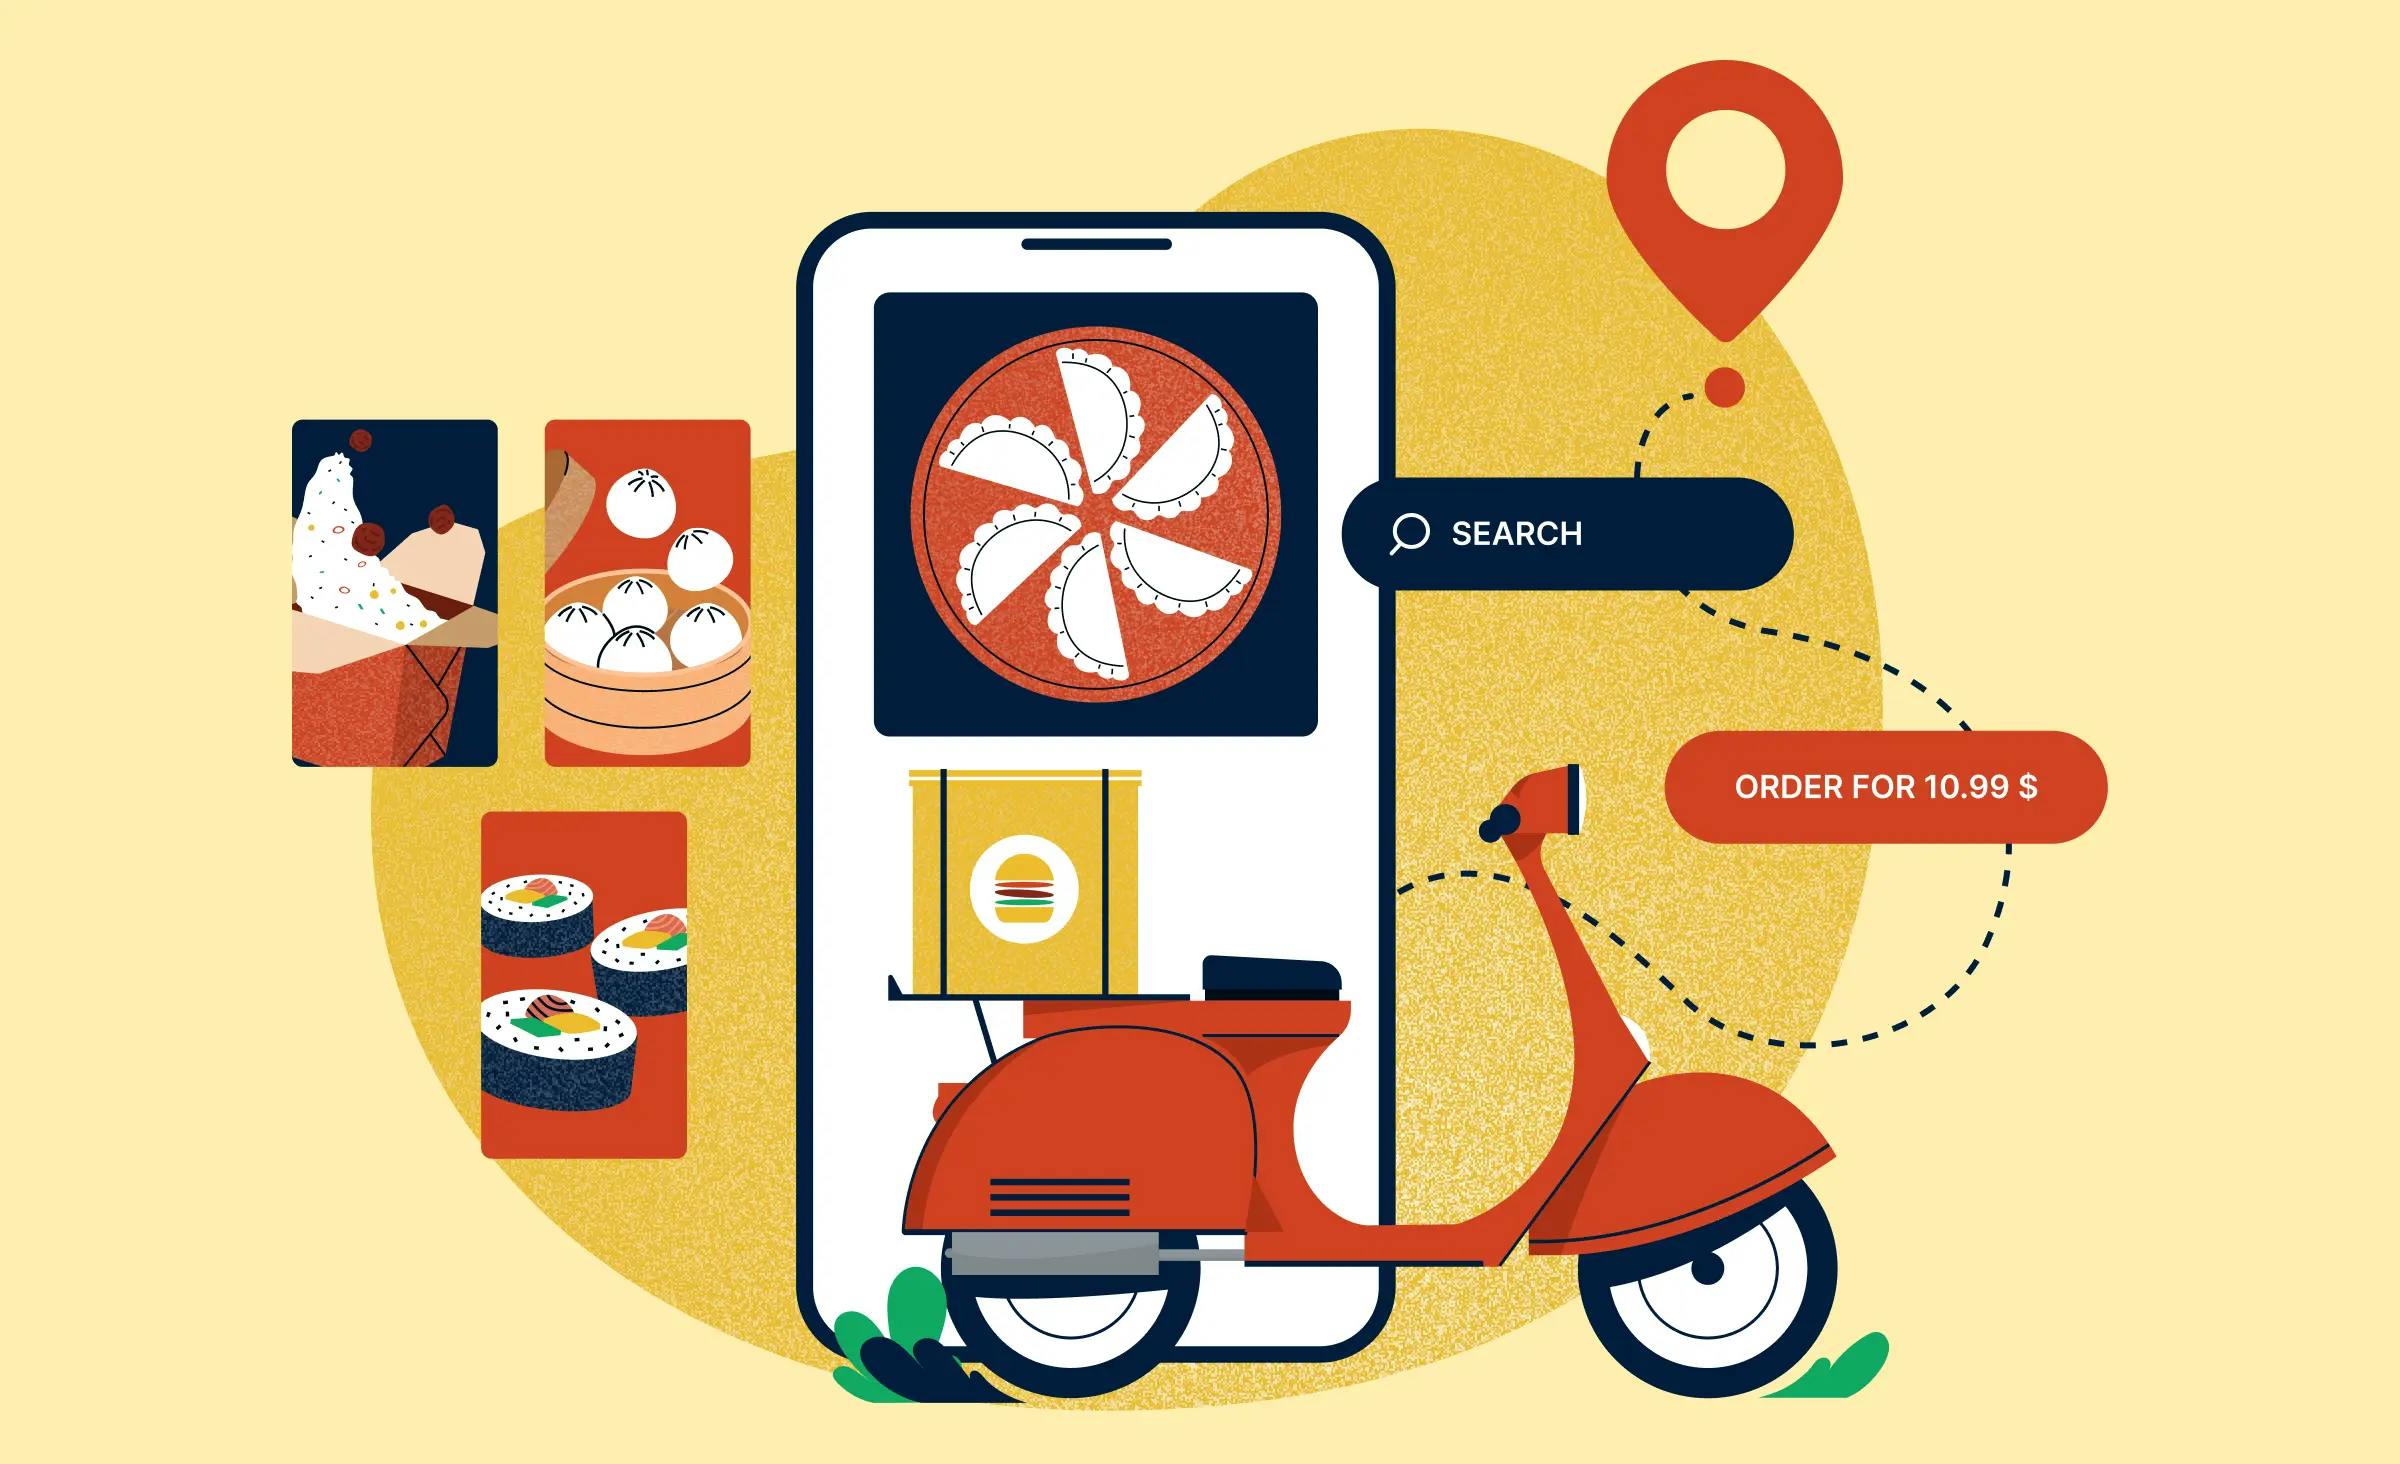 The cover represents an article dedicated to food delivery app development. The background depicts a mobile app screen with a food menu. At the forefront, there is an image of a food delivery scooter heading towards a destination on a map.